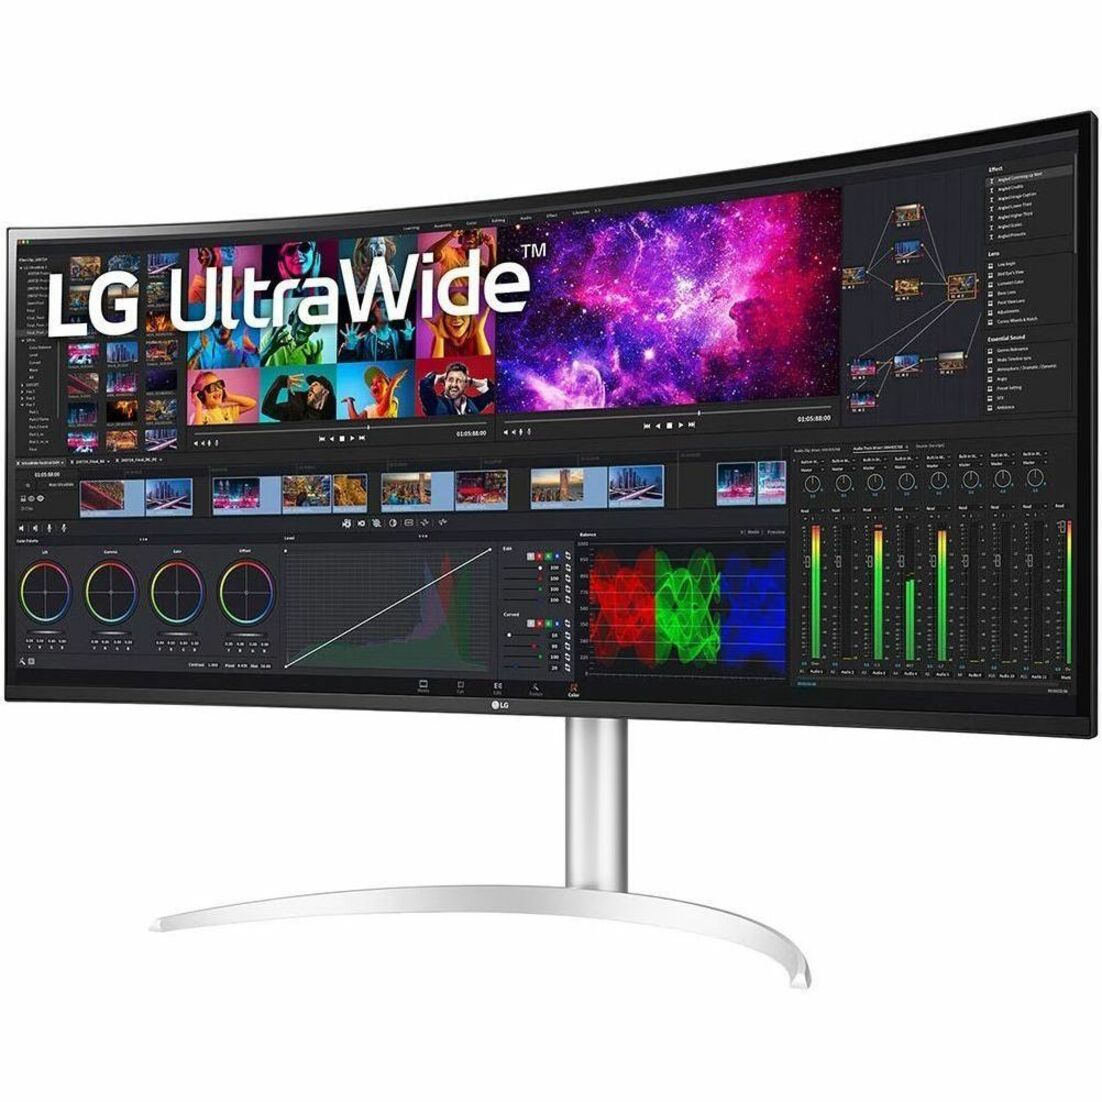 LG 40BP95C-W 40 Dual Quad HD (DQHD) LCD Monitor - 21:9, HDR10, Picture by Picture, OnScreen Control